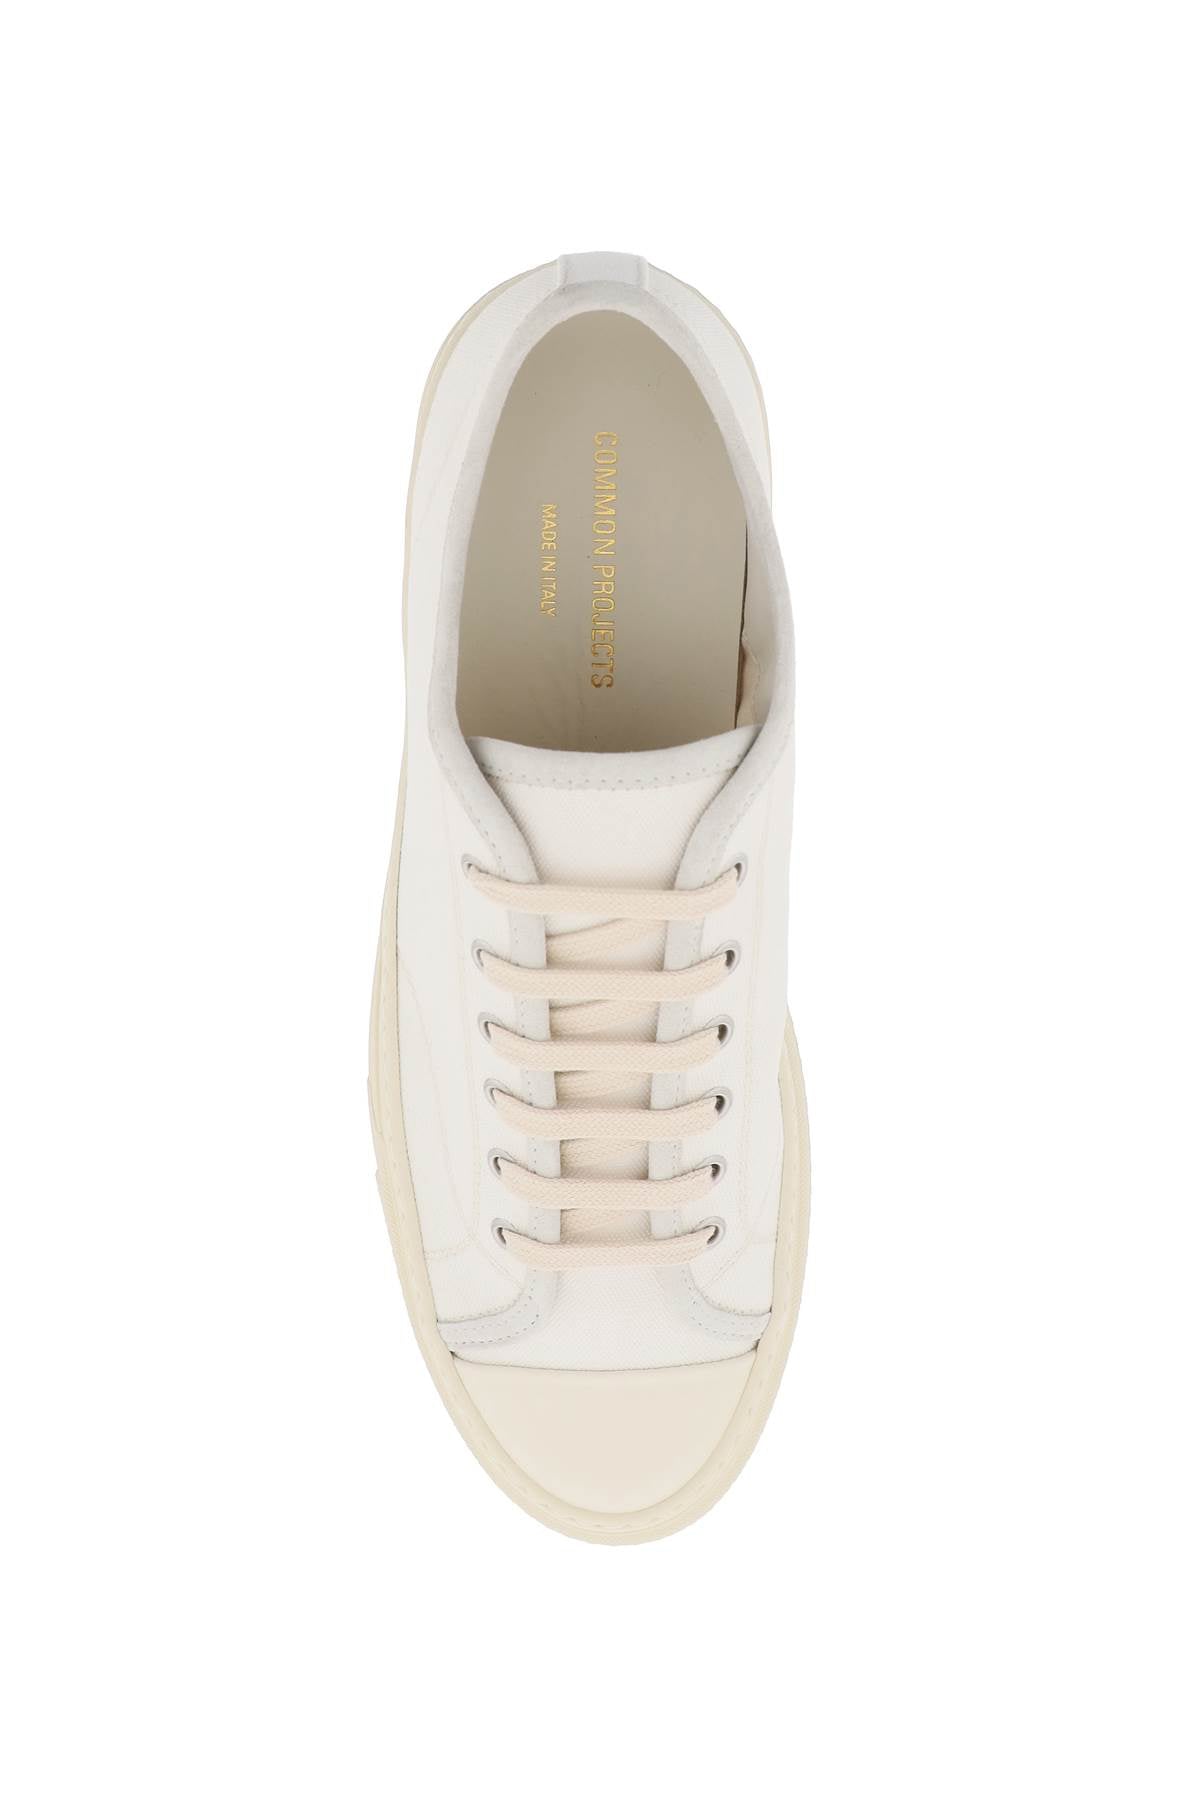 Common projects tournament sneakers-1